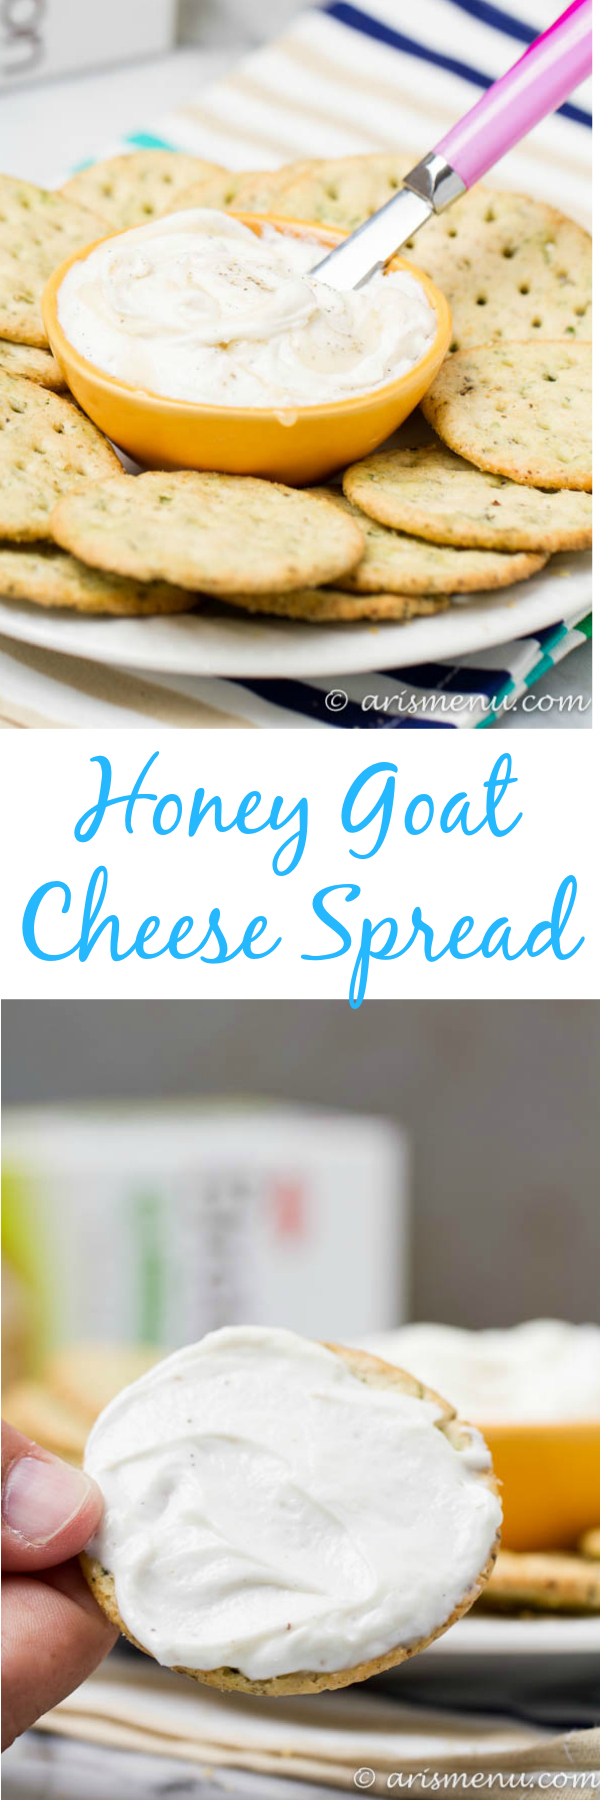 Honey Goat Cheese Spread: Smooth, creamy, sweet and tangy--the perfect spread to jazz up your crackers!